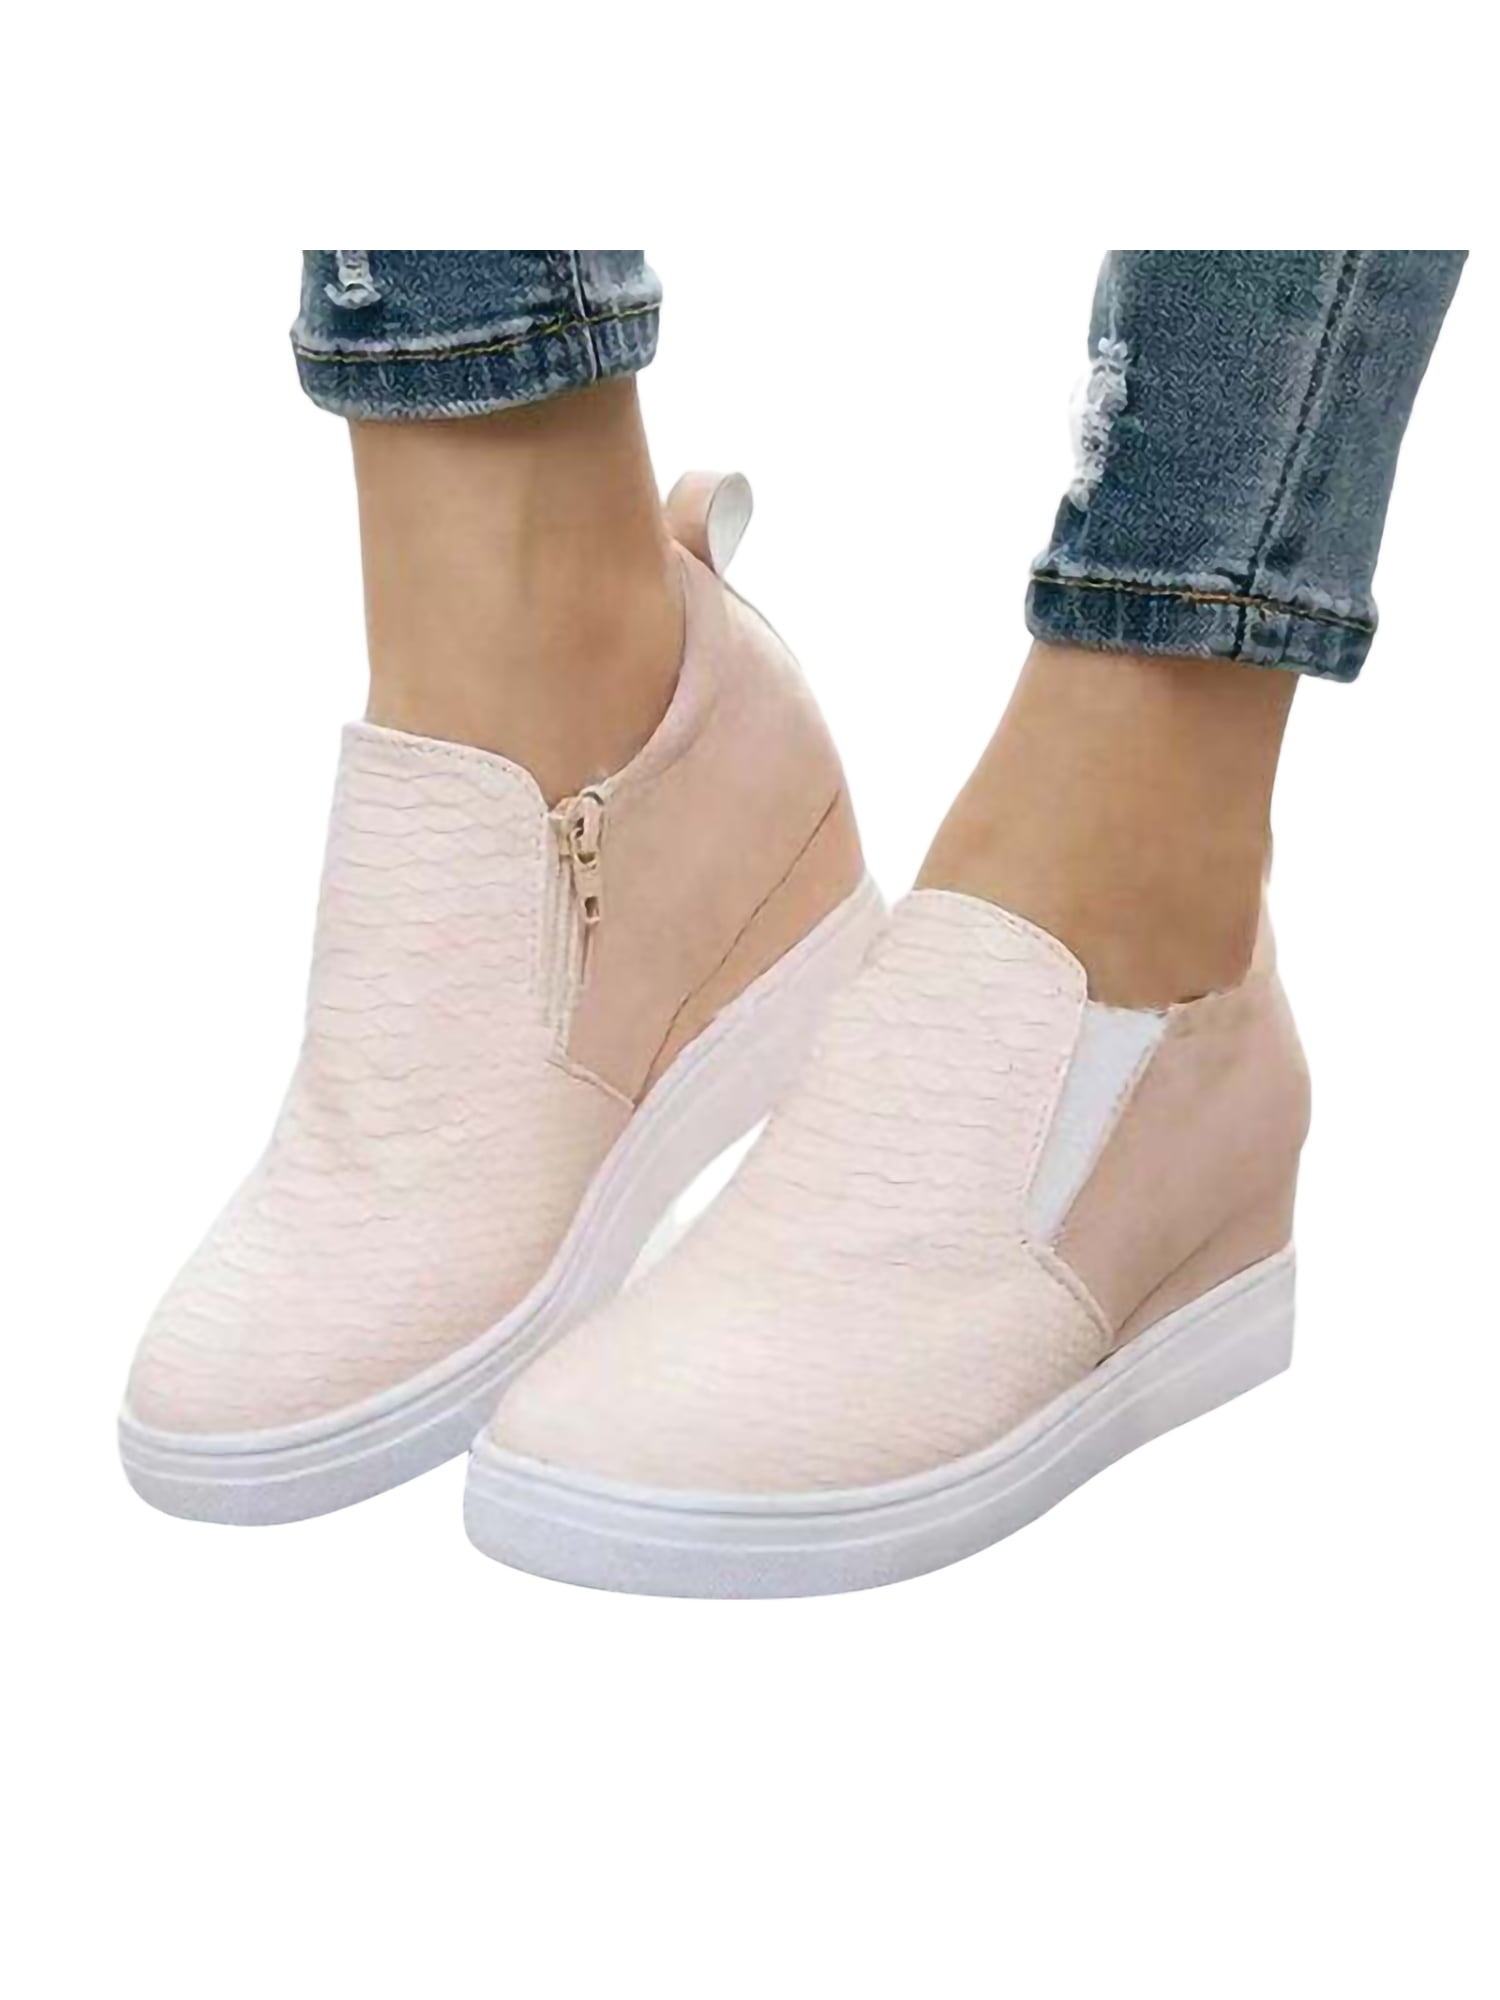 High Heeld Wedge Sneakers for Women Best Chioce for Casual and Daily Wear… Ladies Hidden Sneakers Lace Up Shoes 